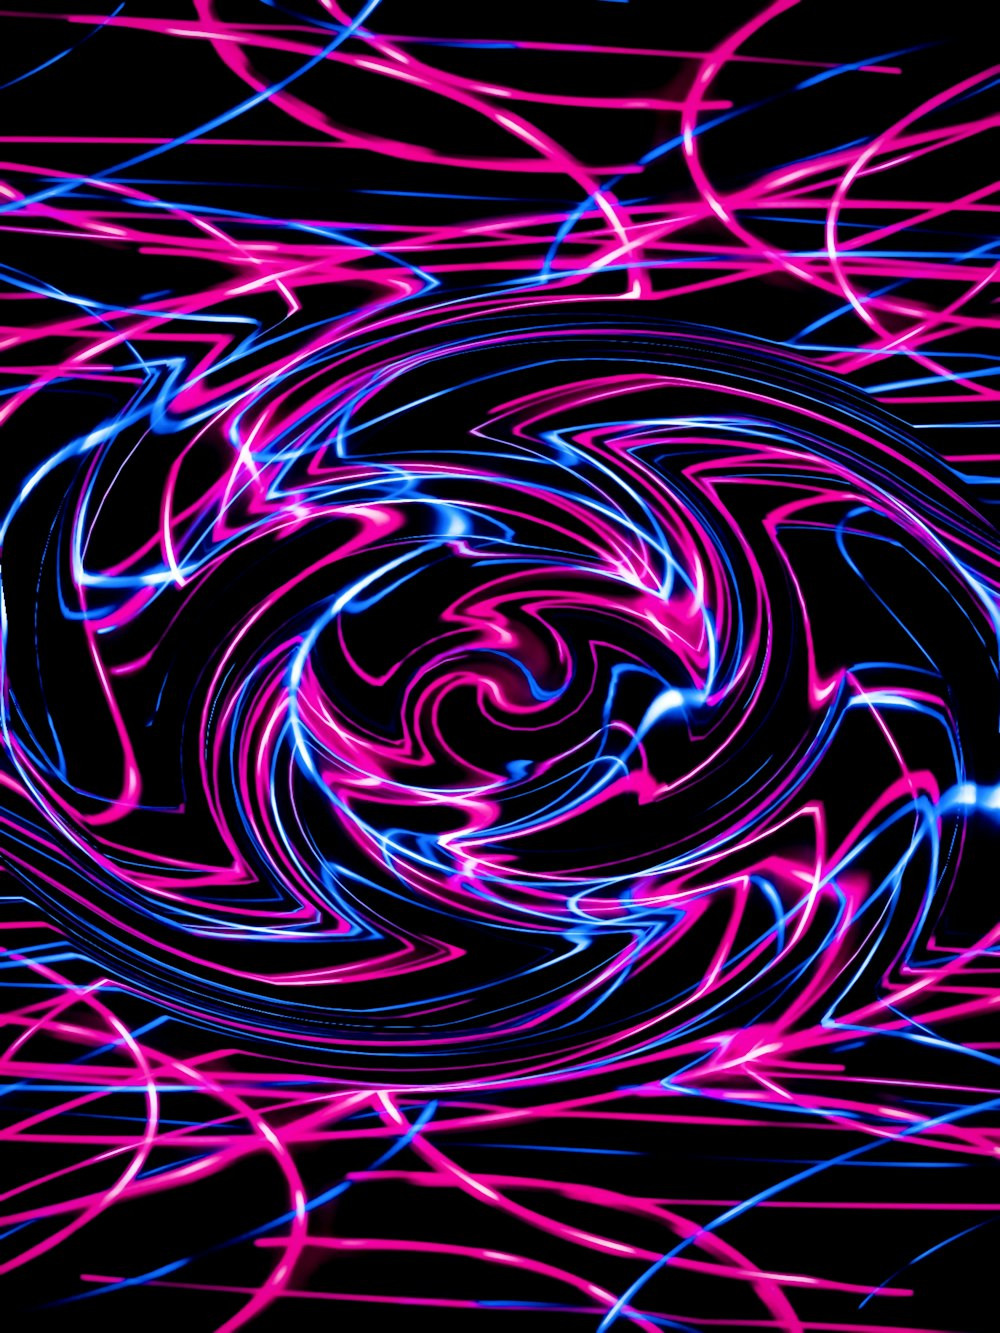 a computer generated image of pink and blue swirls